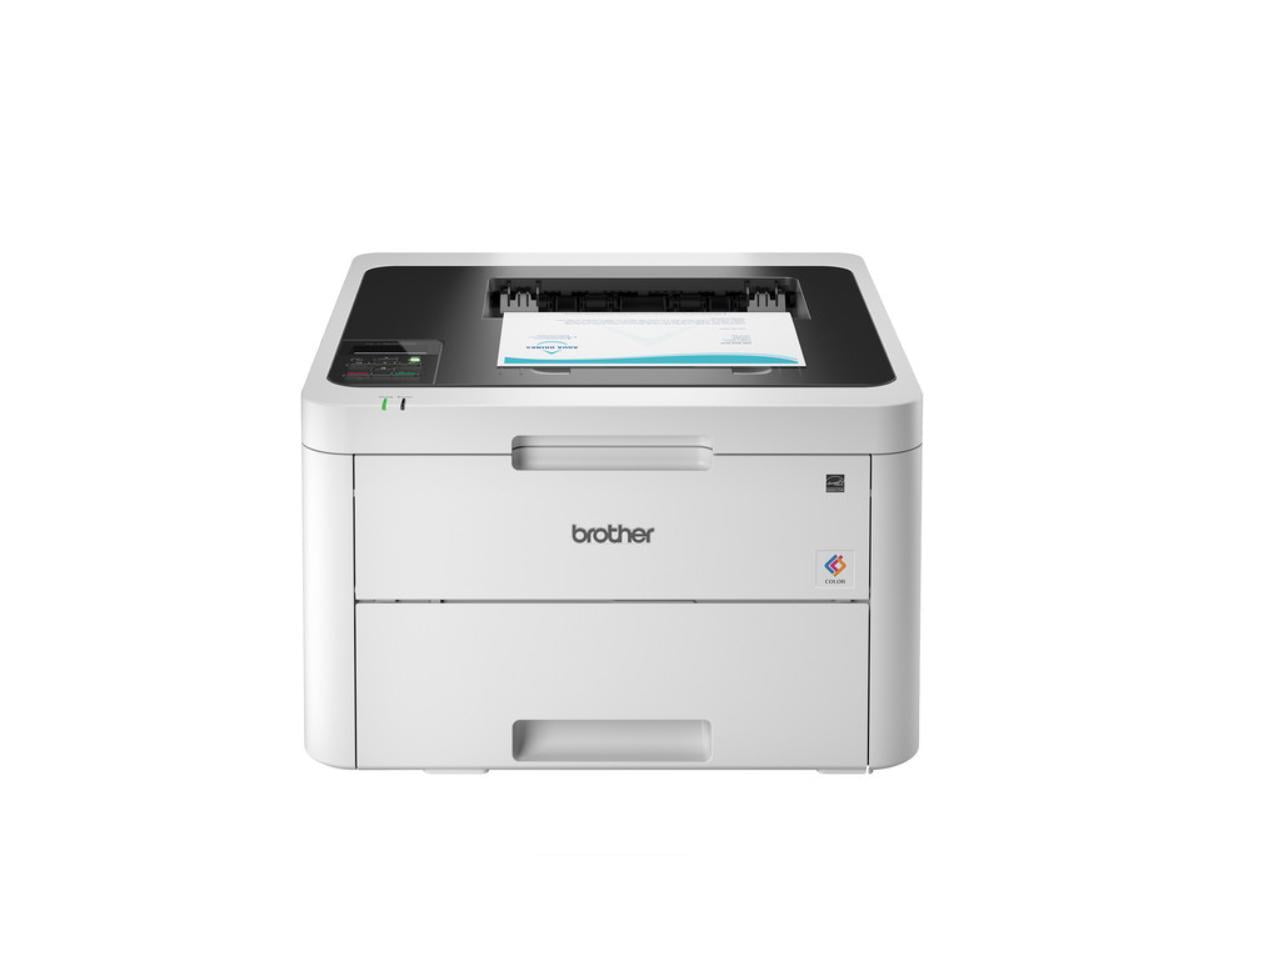 How to Check the Toner Levels on a Brother HL-L2350 DW Laser Printer 